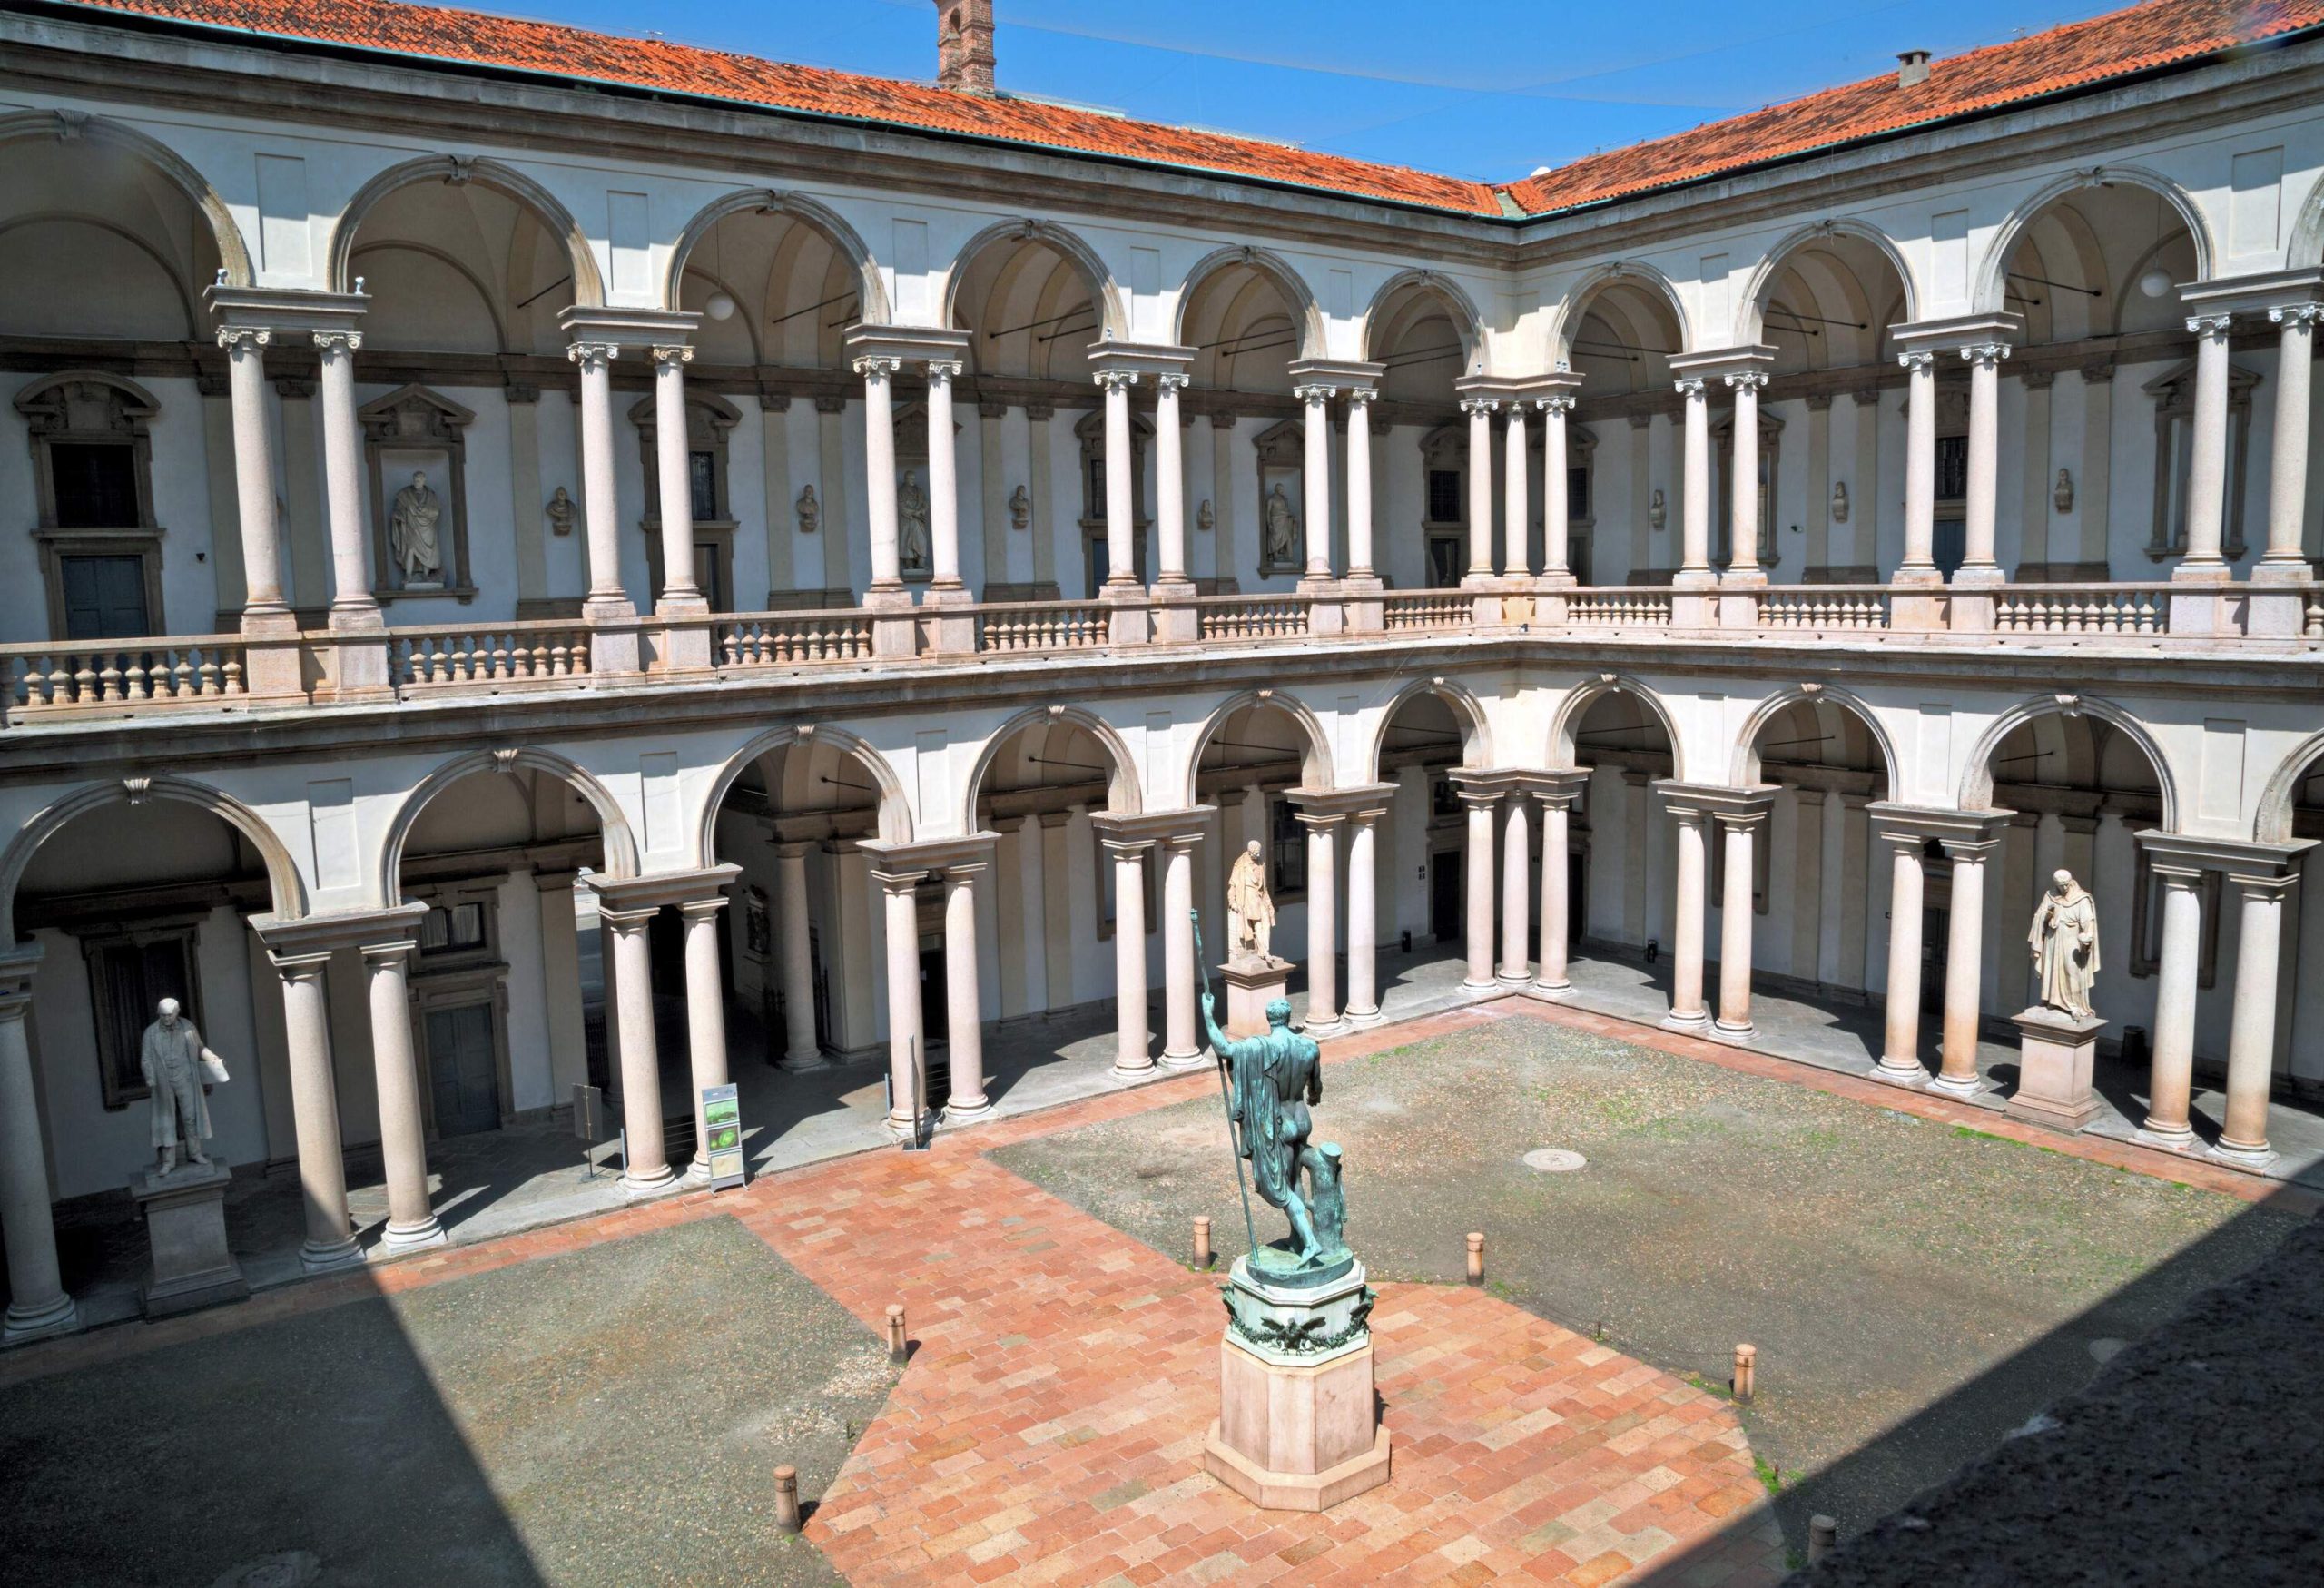 A courtyard with a statue in the centre and along the columns of a two-storey arcade building.